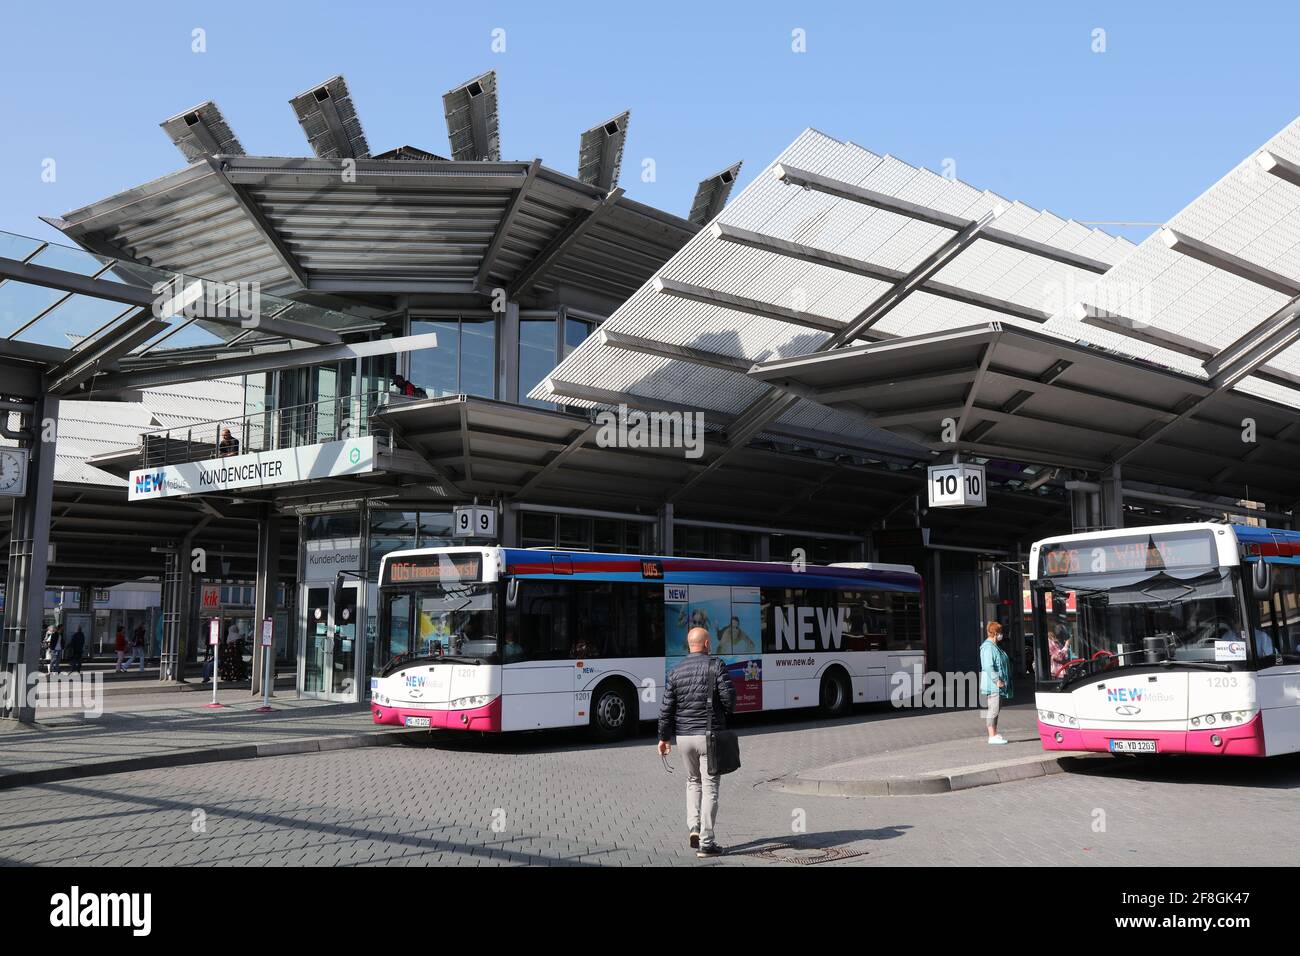 MOENCHENGLADBACH, GERMANY - SEPTEMBER 18, 2020: People wait at the bus station of Gladbach in Moenchengladbach, a major city in North Rhine-Westphalia Stock Photo